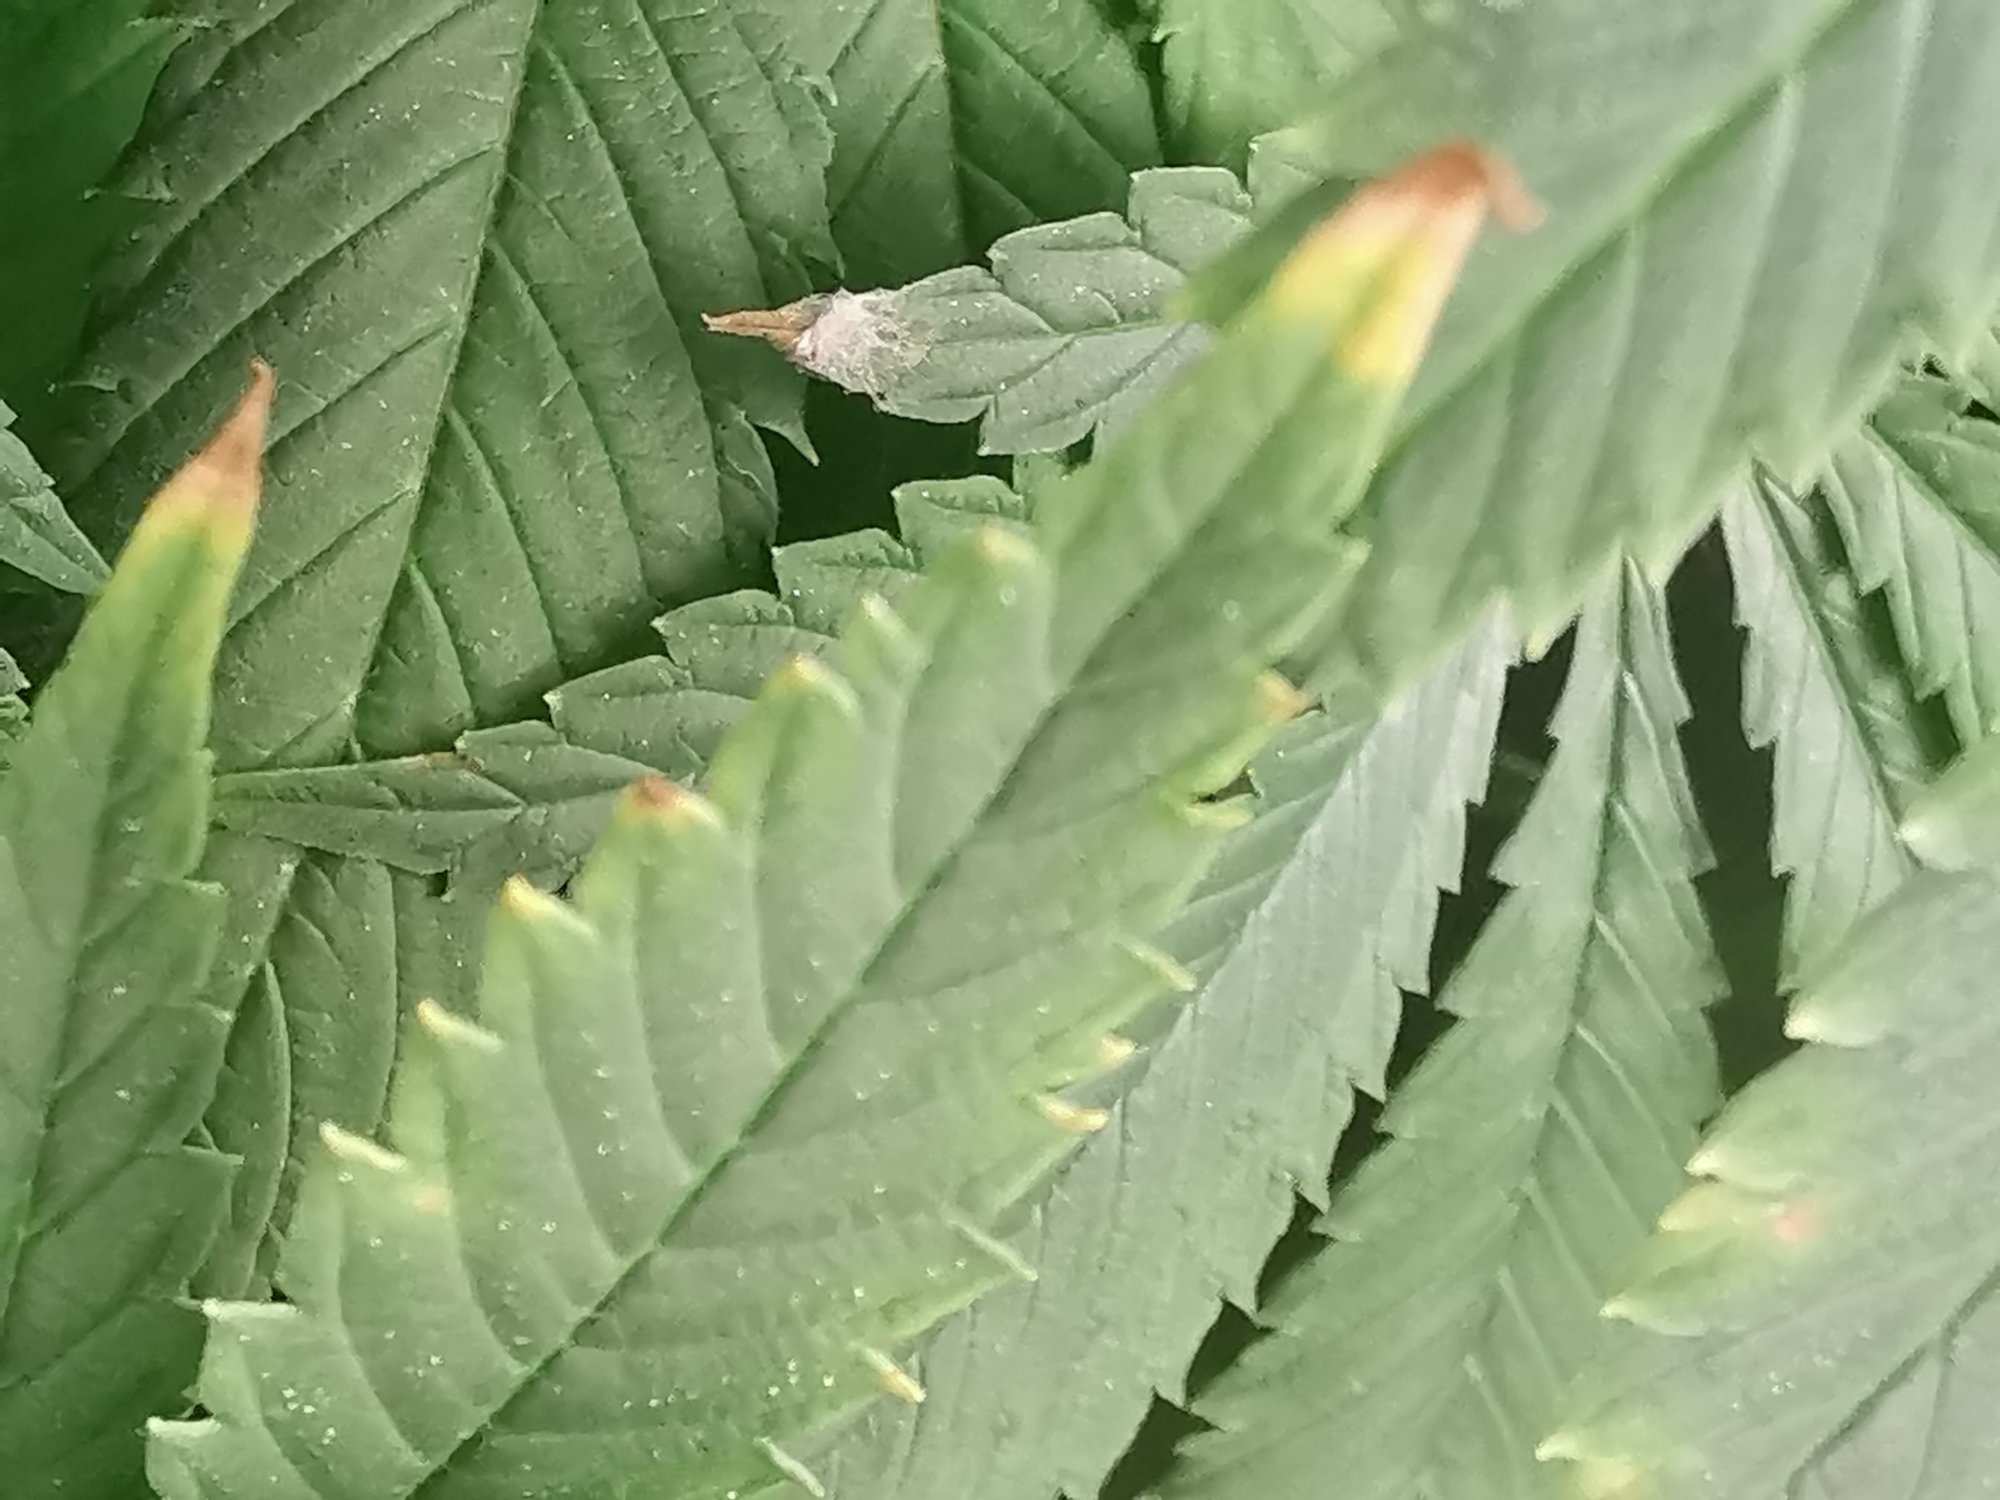 Fuzzy stuff on dying leaves